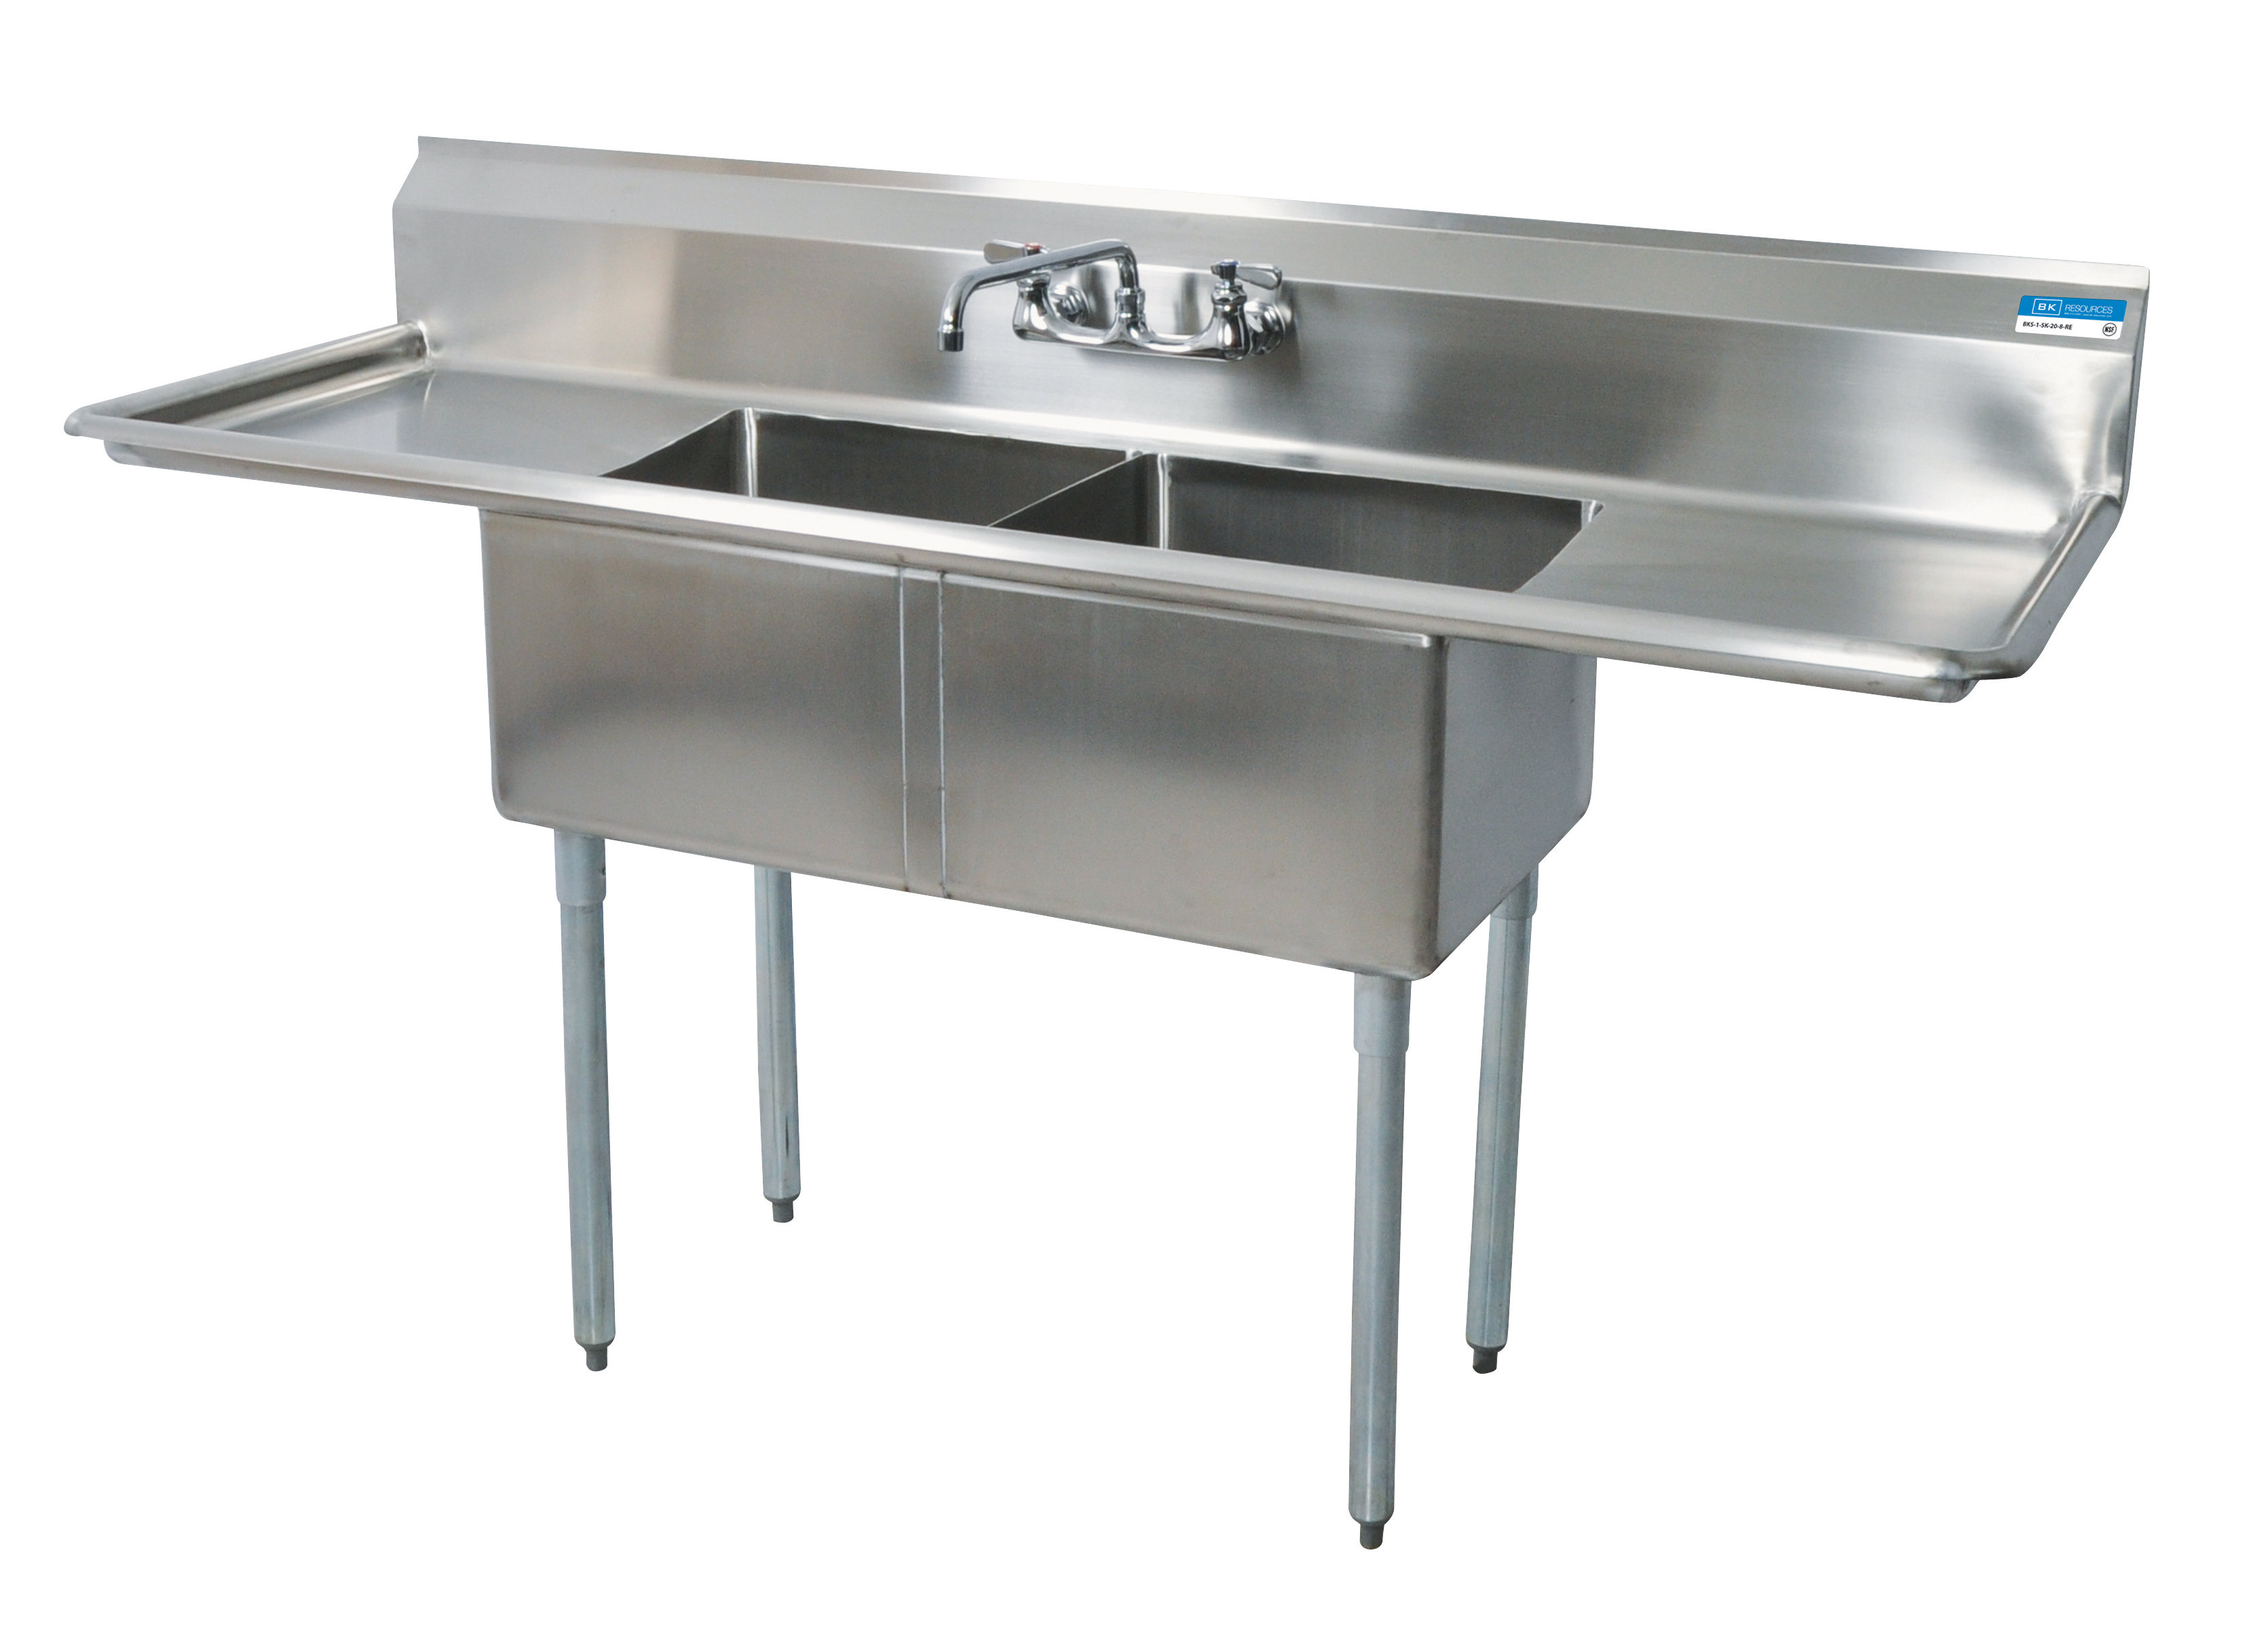 2 compartment commercial kitchen sink size